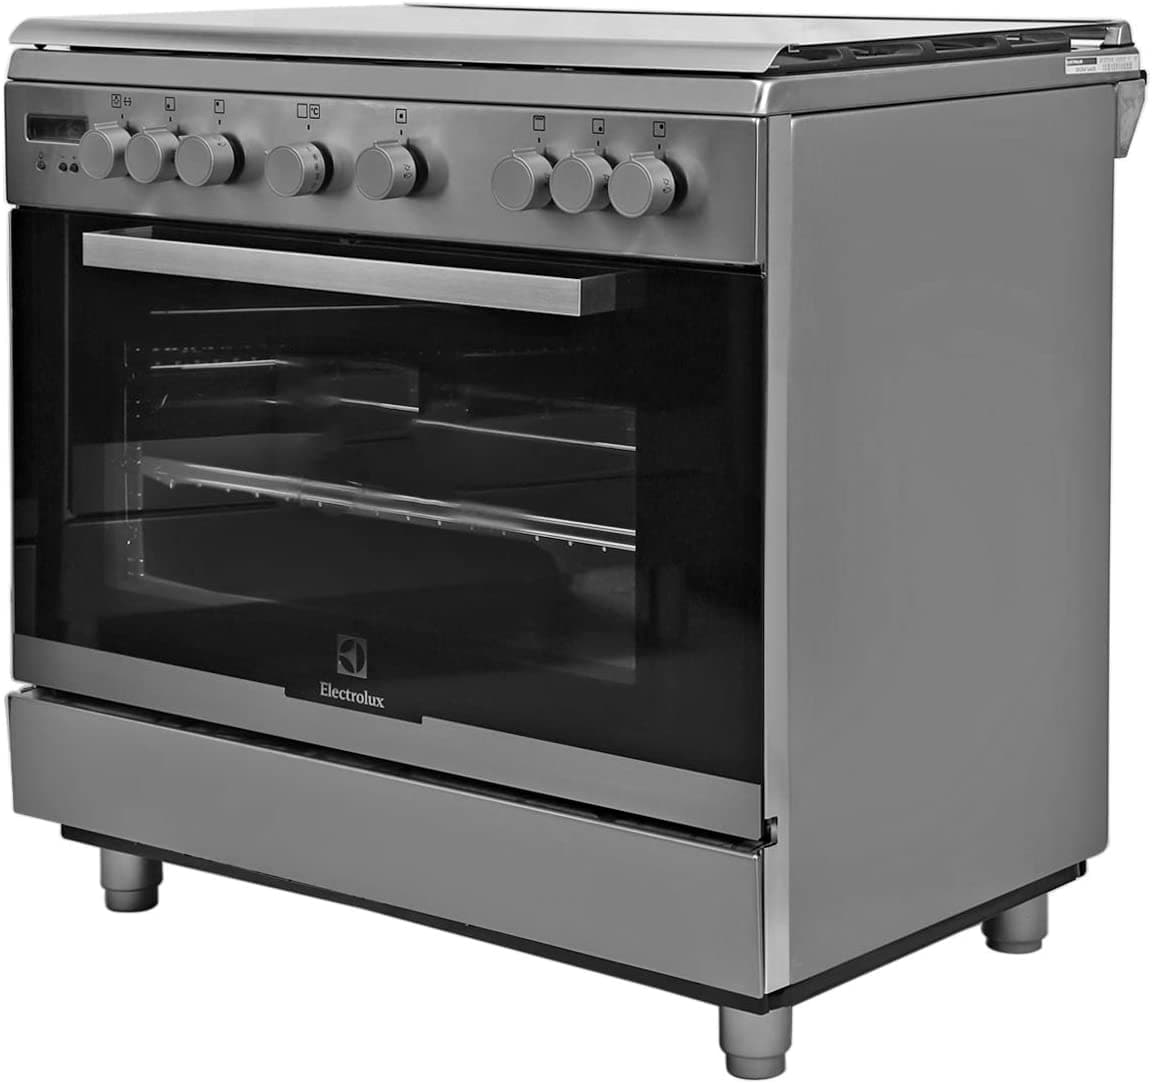 Electrolux ELUX 90X60 5GB GAS OVEN F.SAFETY CAST IRON  GRIDS S.STEEL-EKG941AAOX - Jashanmal Home